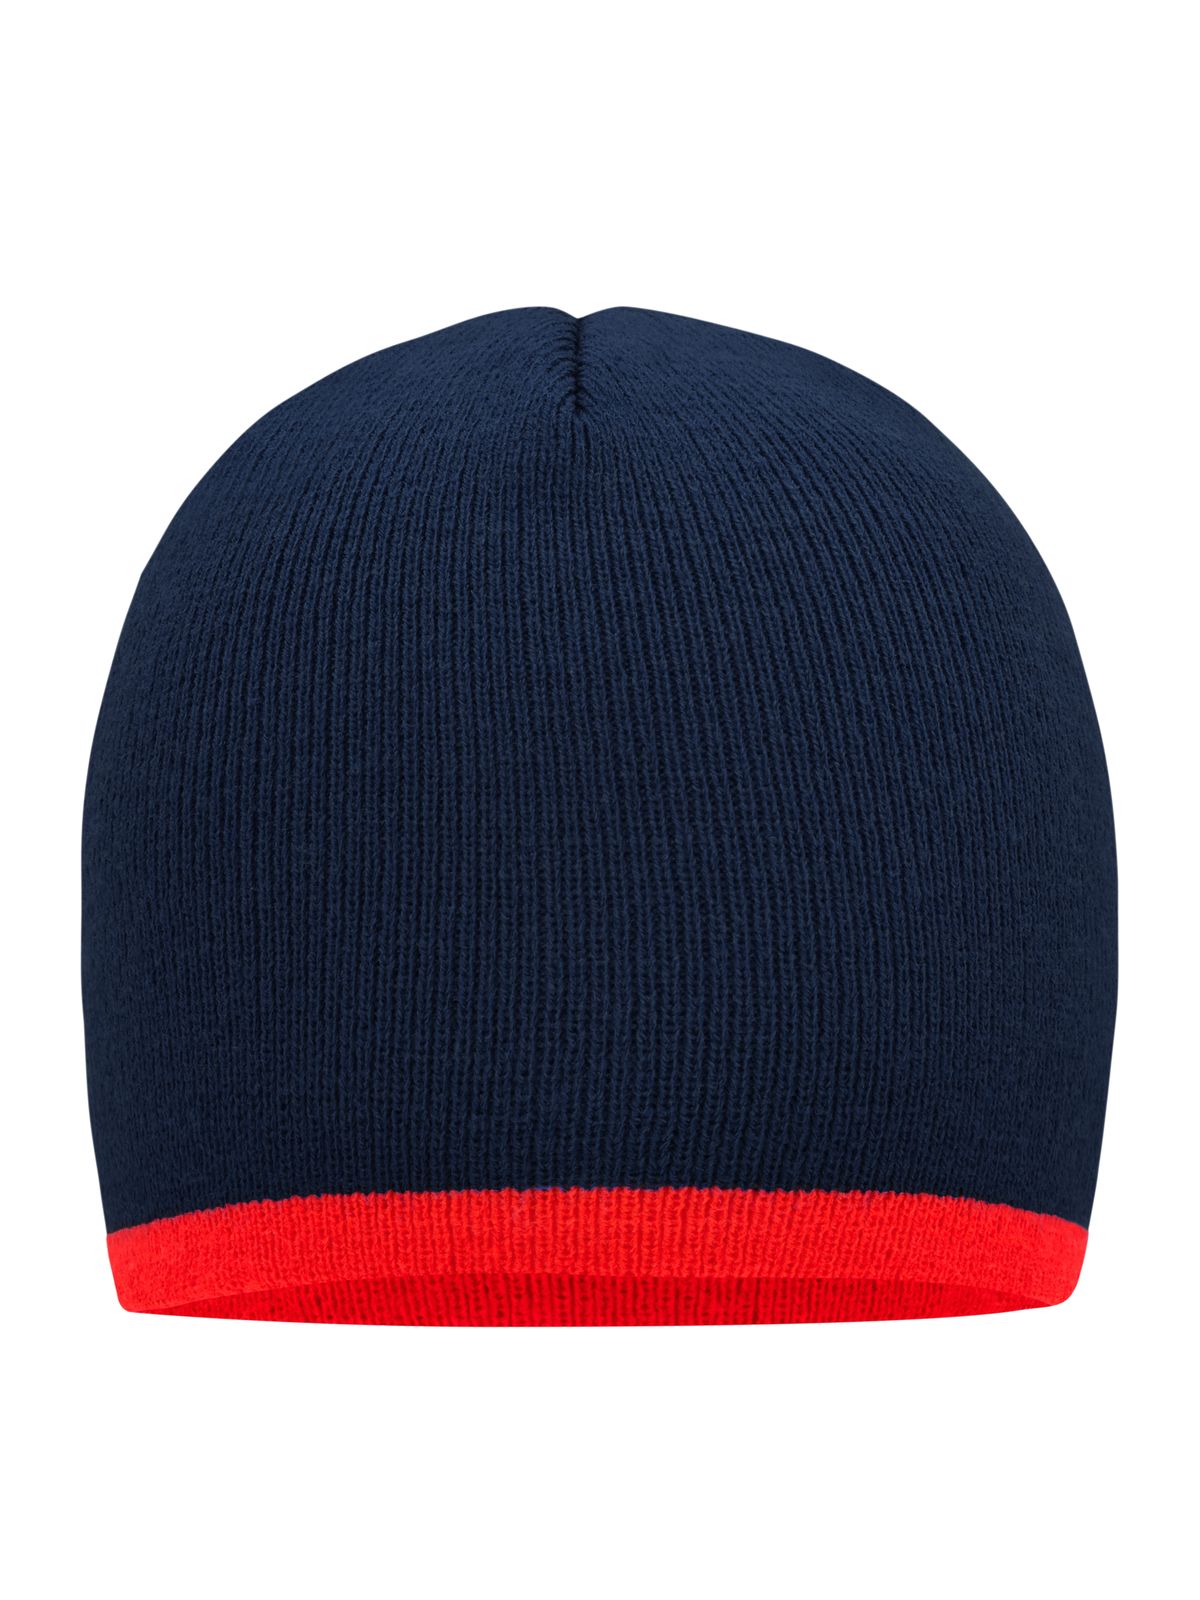 beanie-with-contrasting-border-navy-red.webp